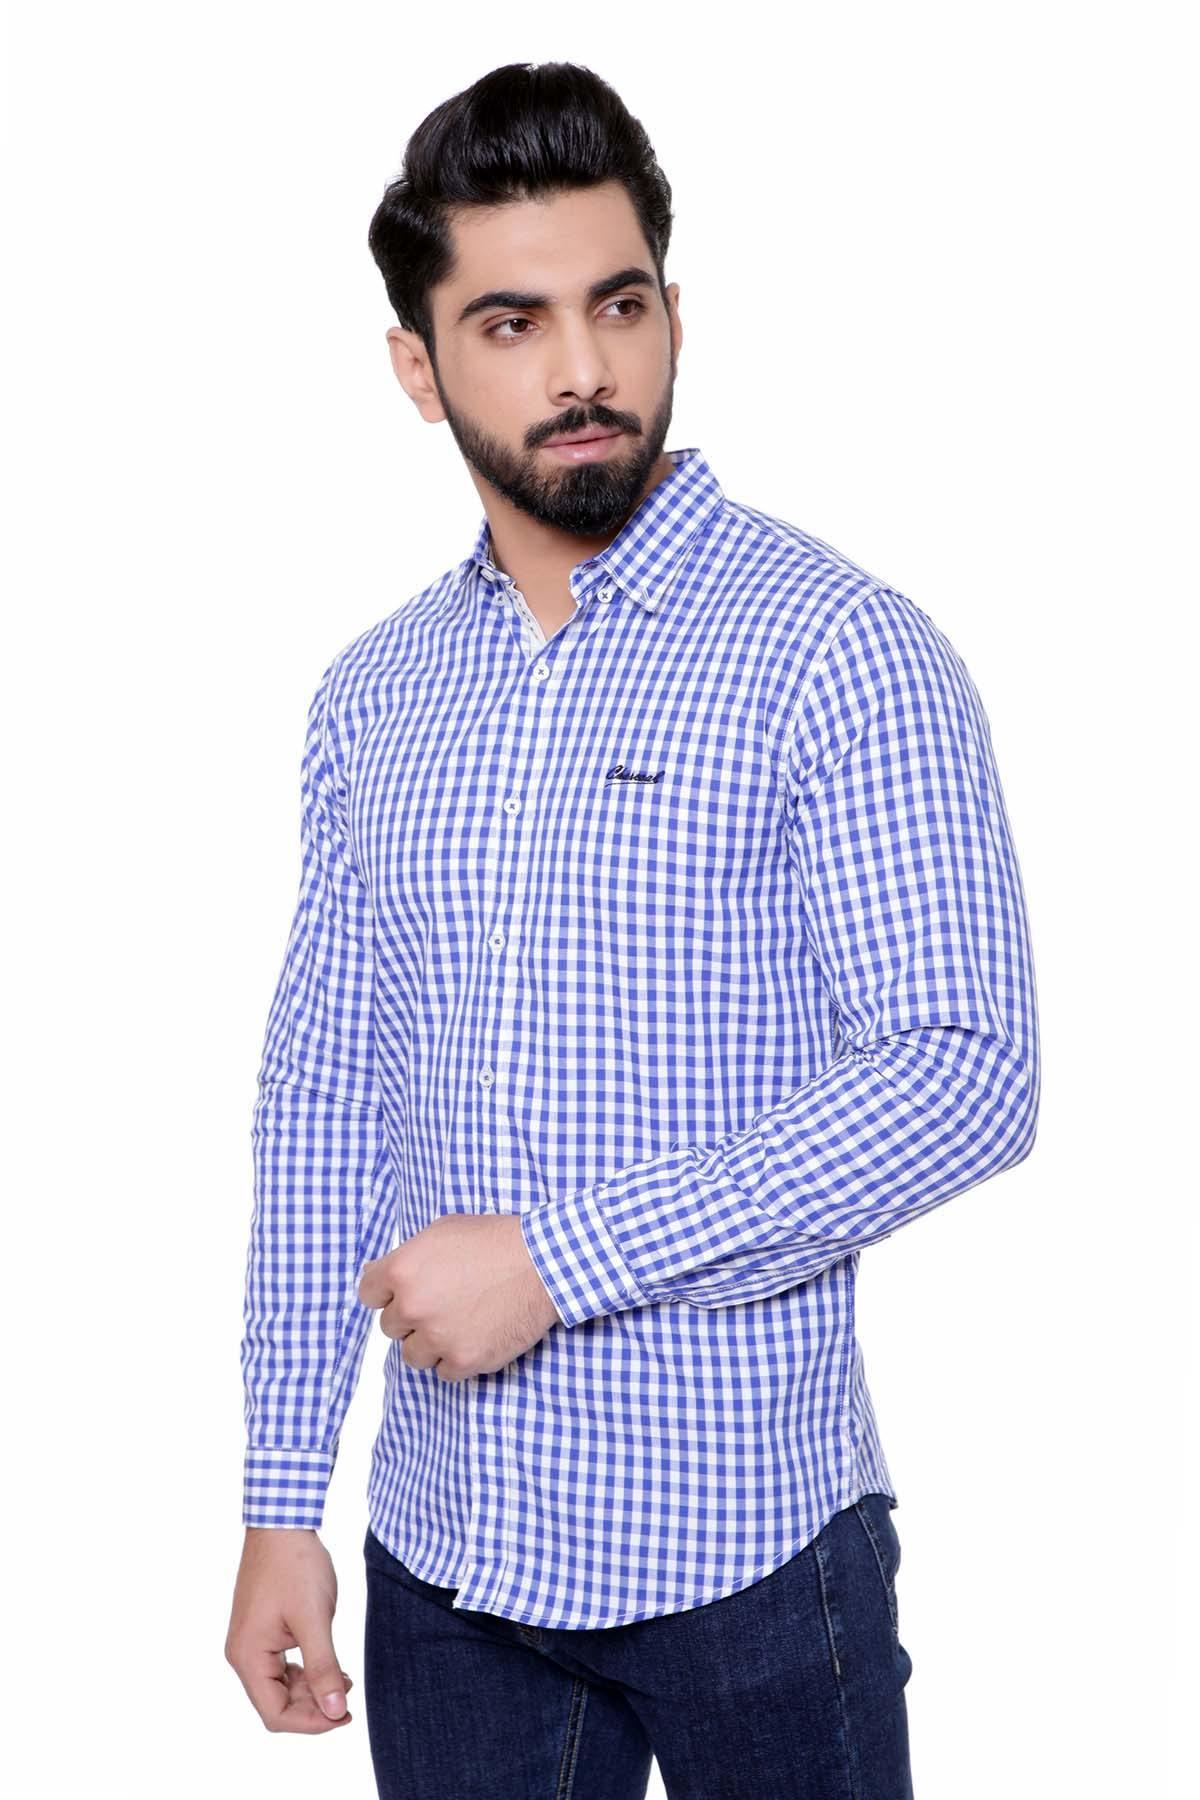 CASUAL SHIRT FULL SLEEVE BLUE WHITE CHECK at Charcoal Clothing